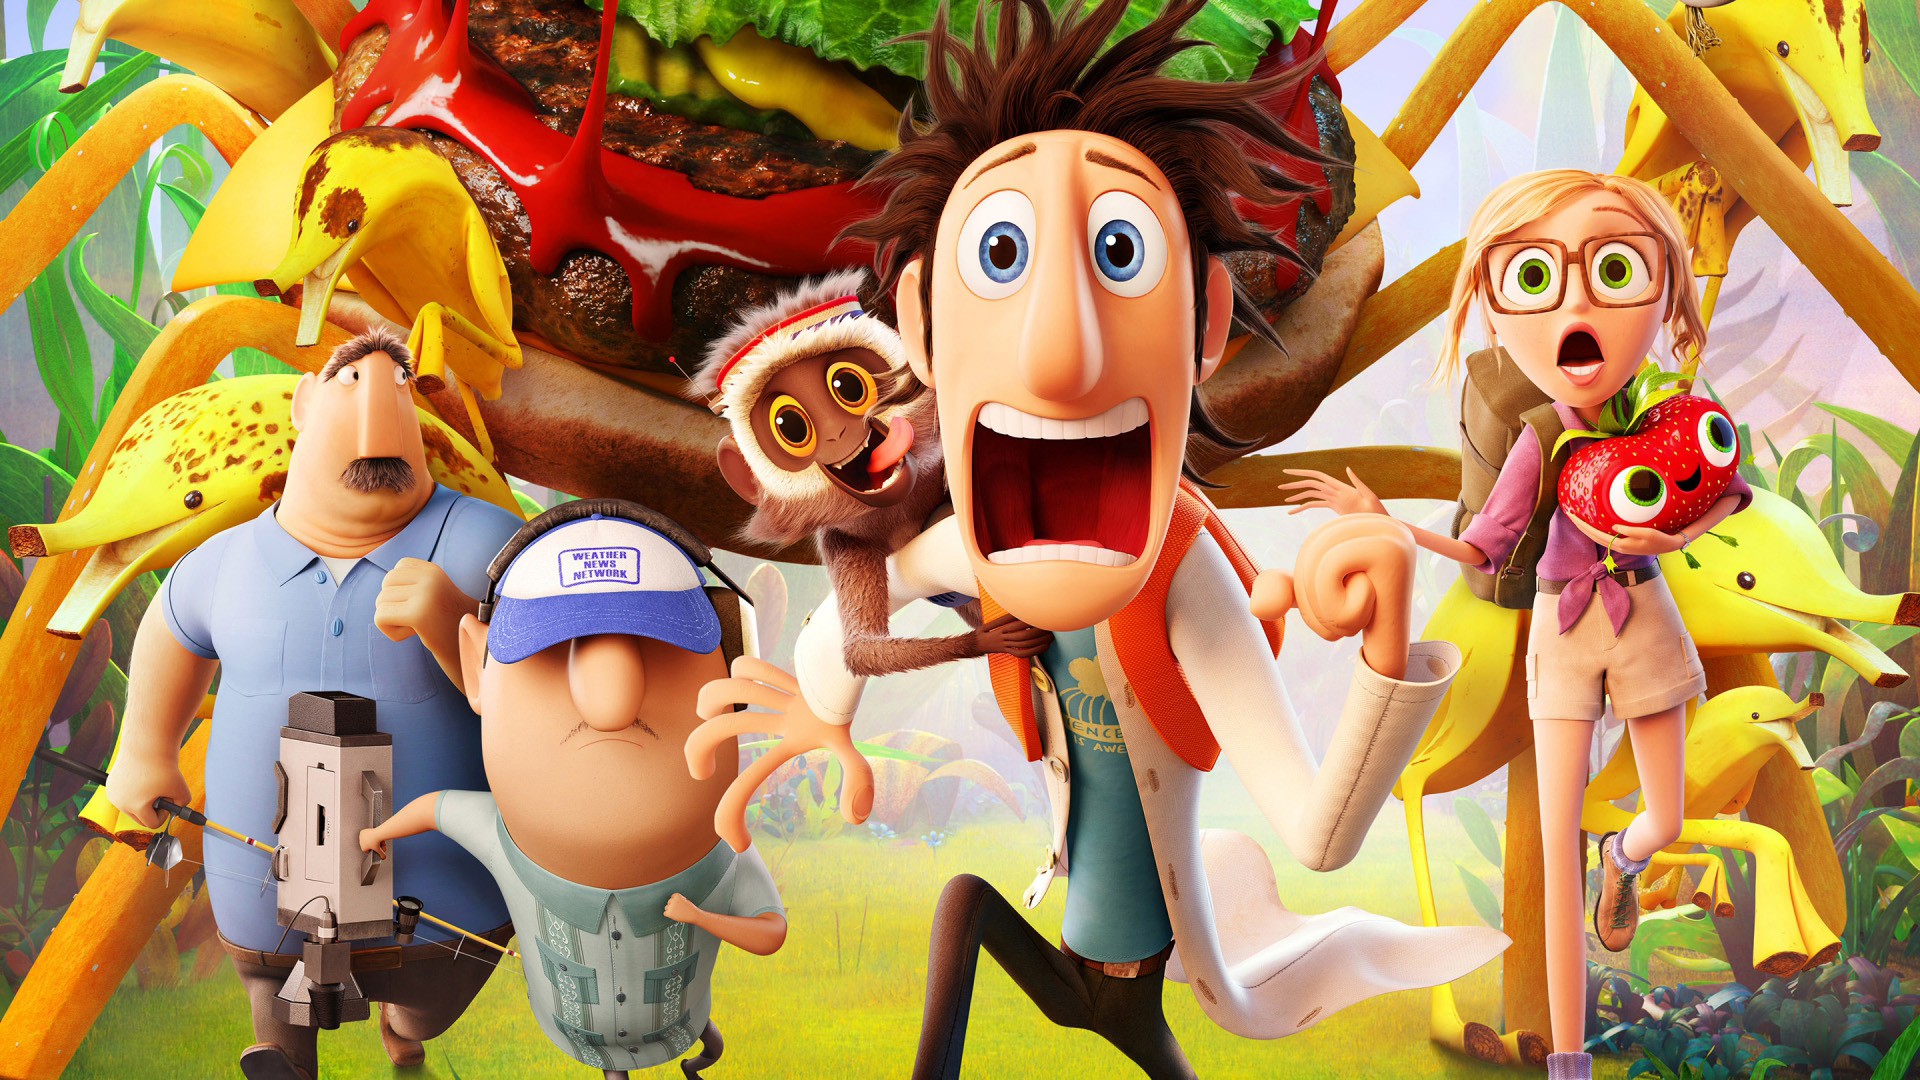 Cloudy with a Chance of Meatballs 2 Art